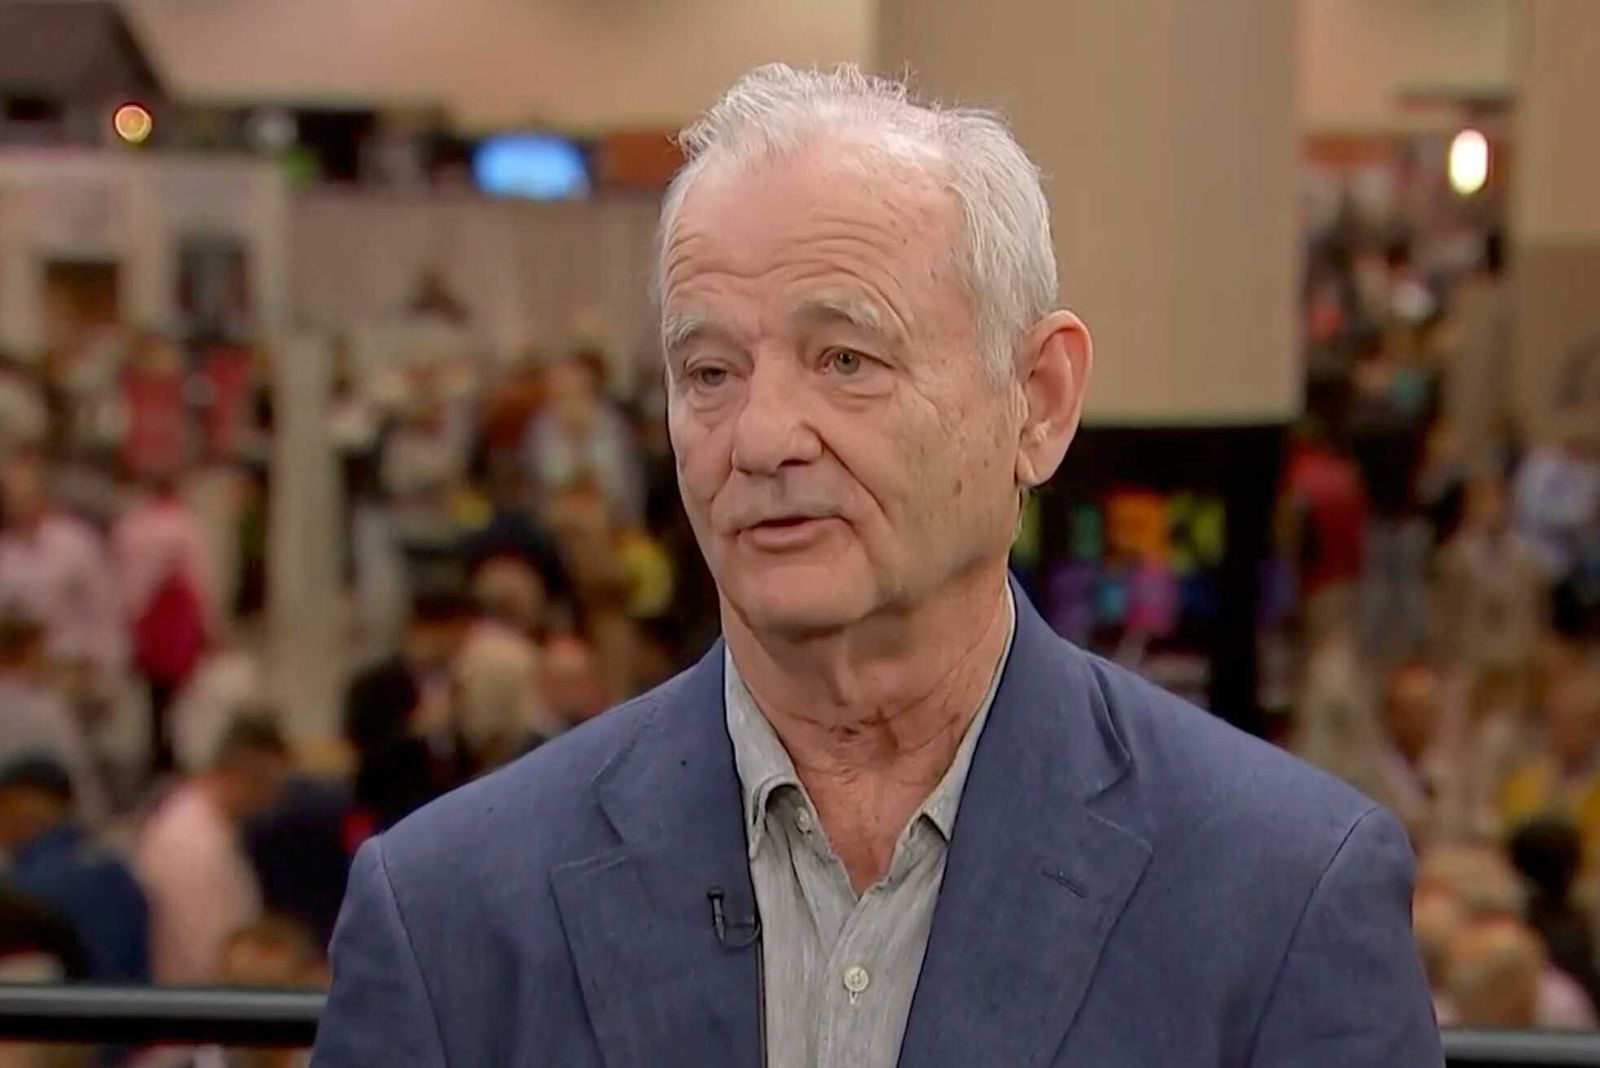 Behind the scenes: the untold story of Bill Murray in St. Vincent